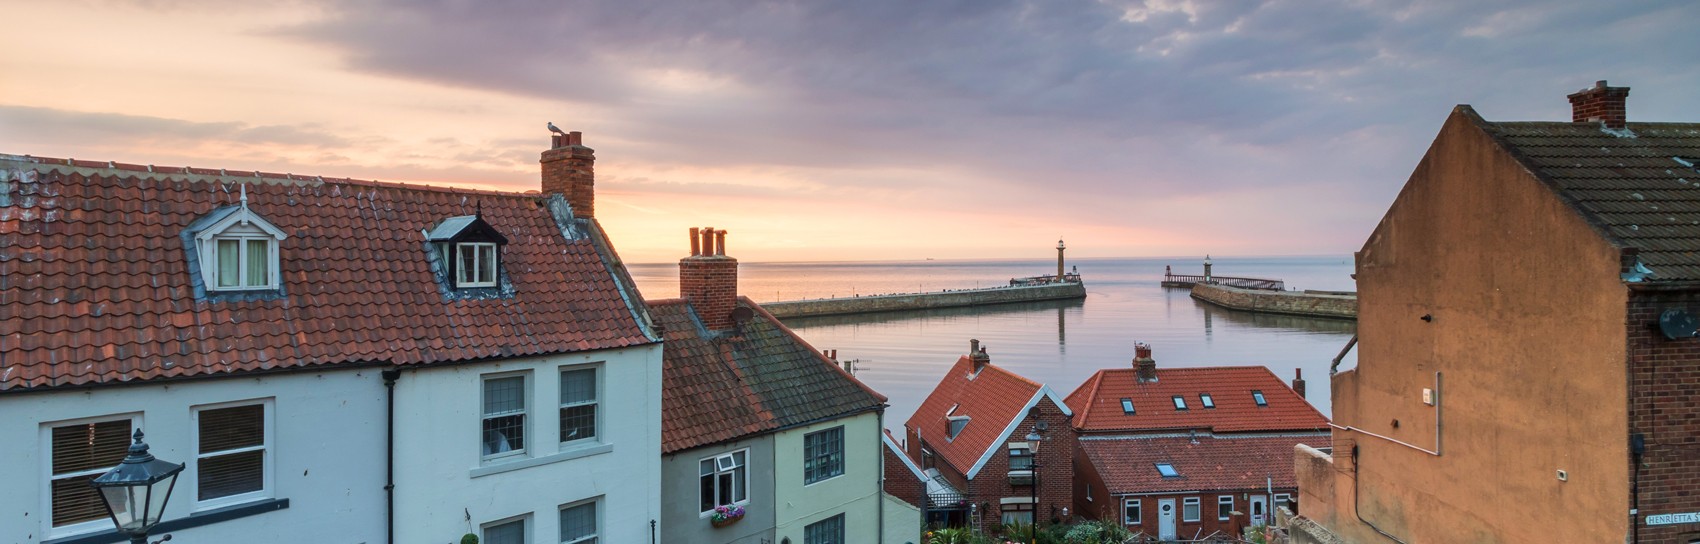 Fading Light in Whitby in Yorkshire. Photograph by MATT HILLIER